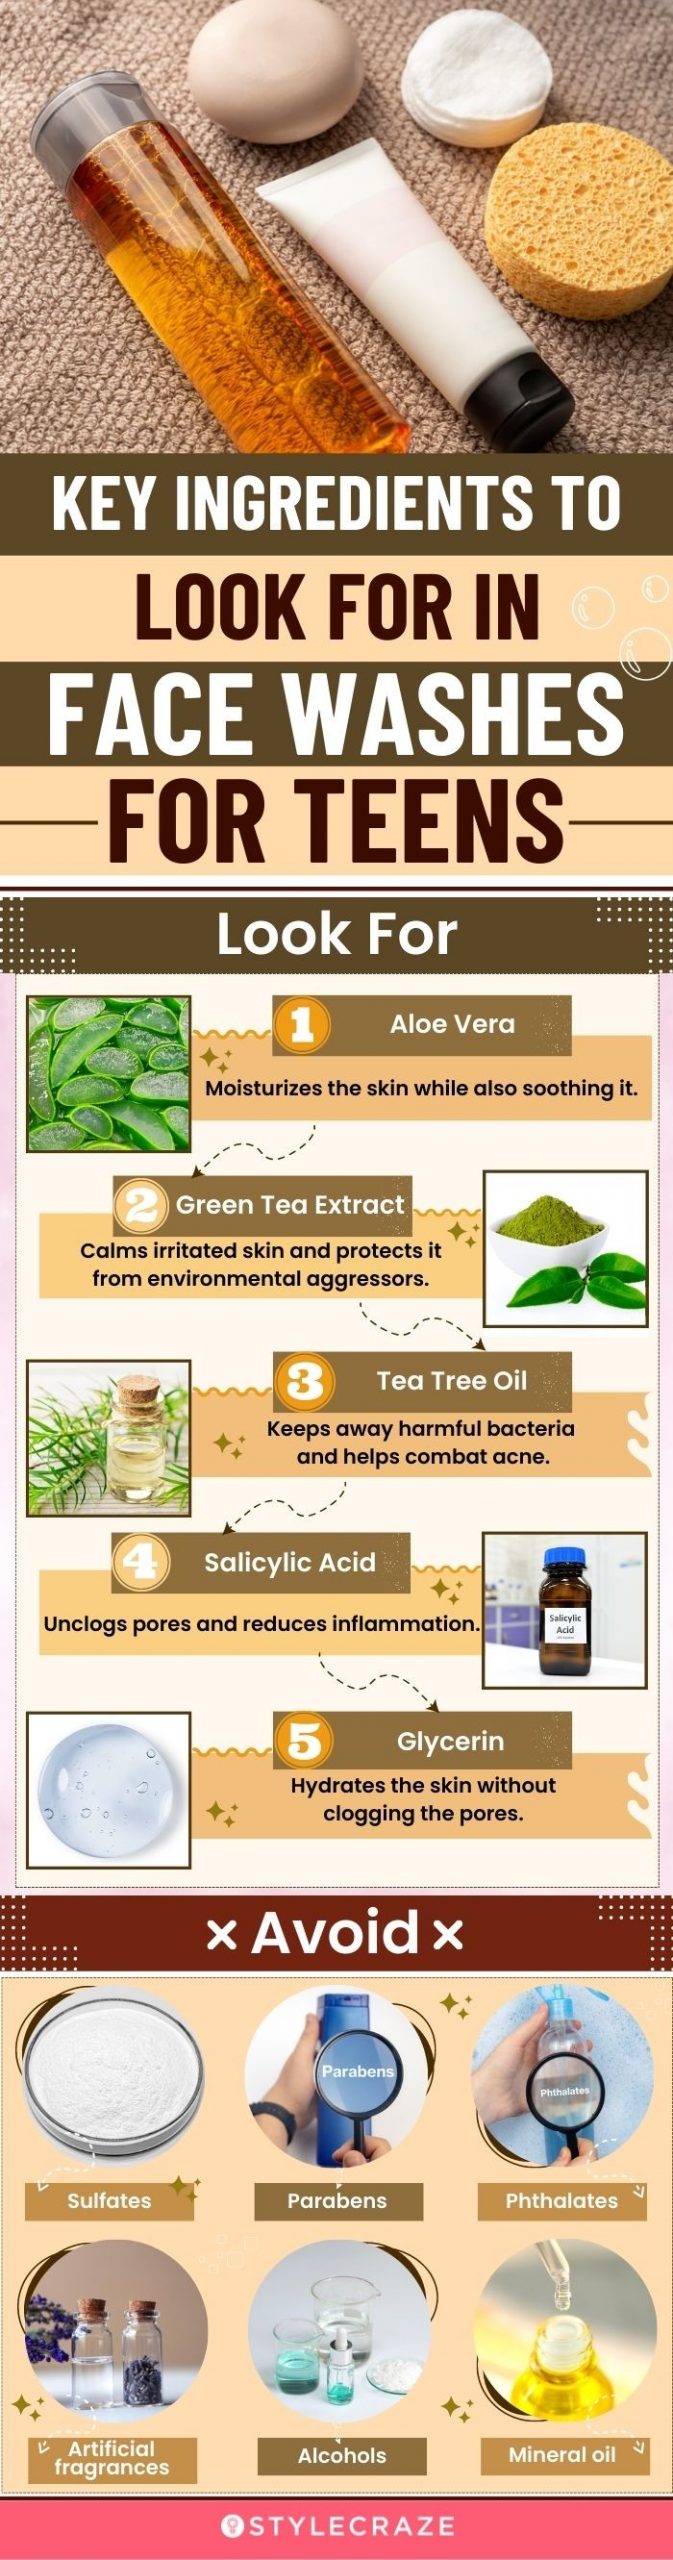 Key Ingredients To Look For In Face Washes For Teens (infographic)